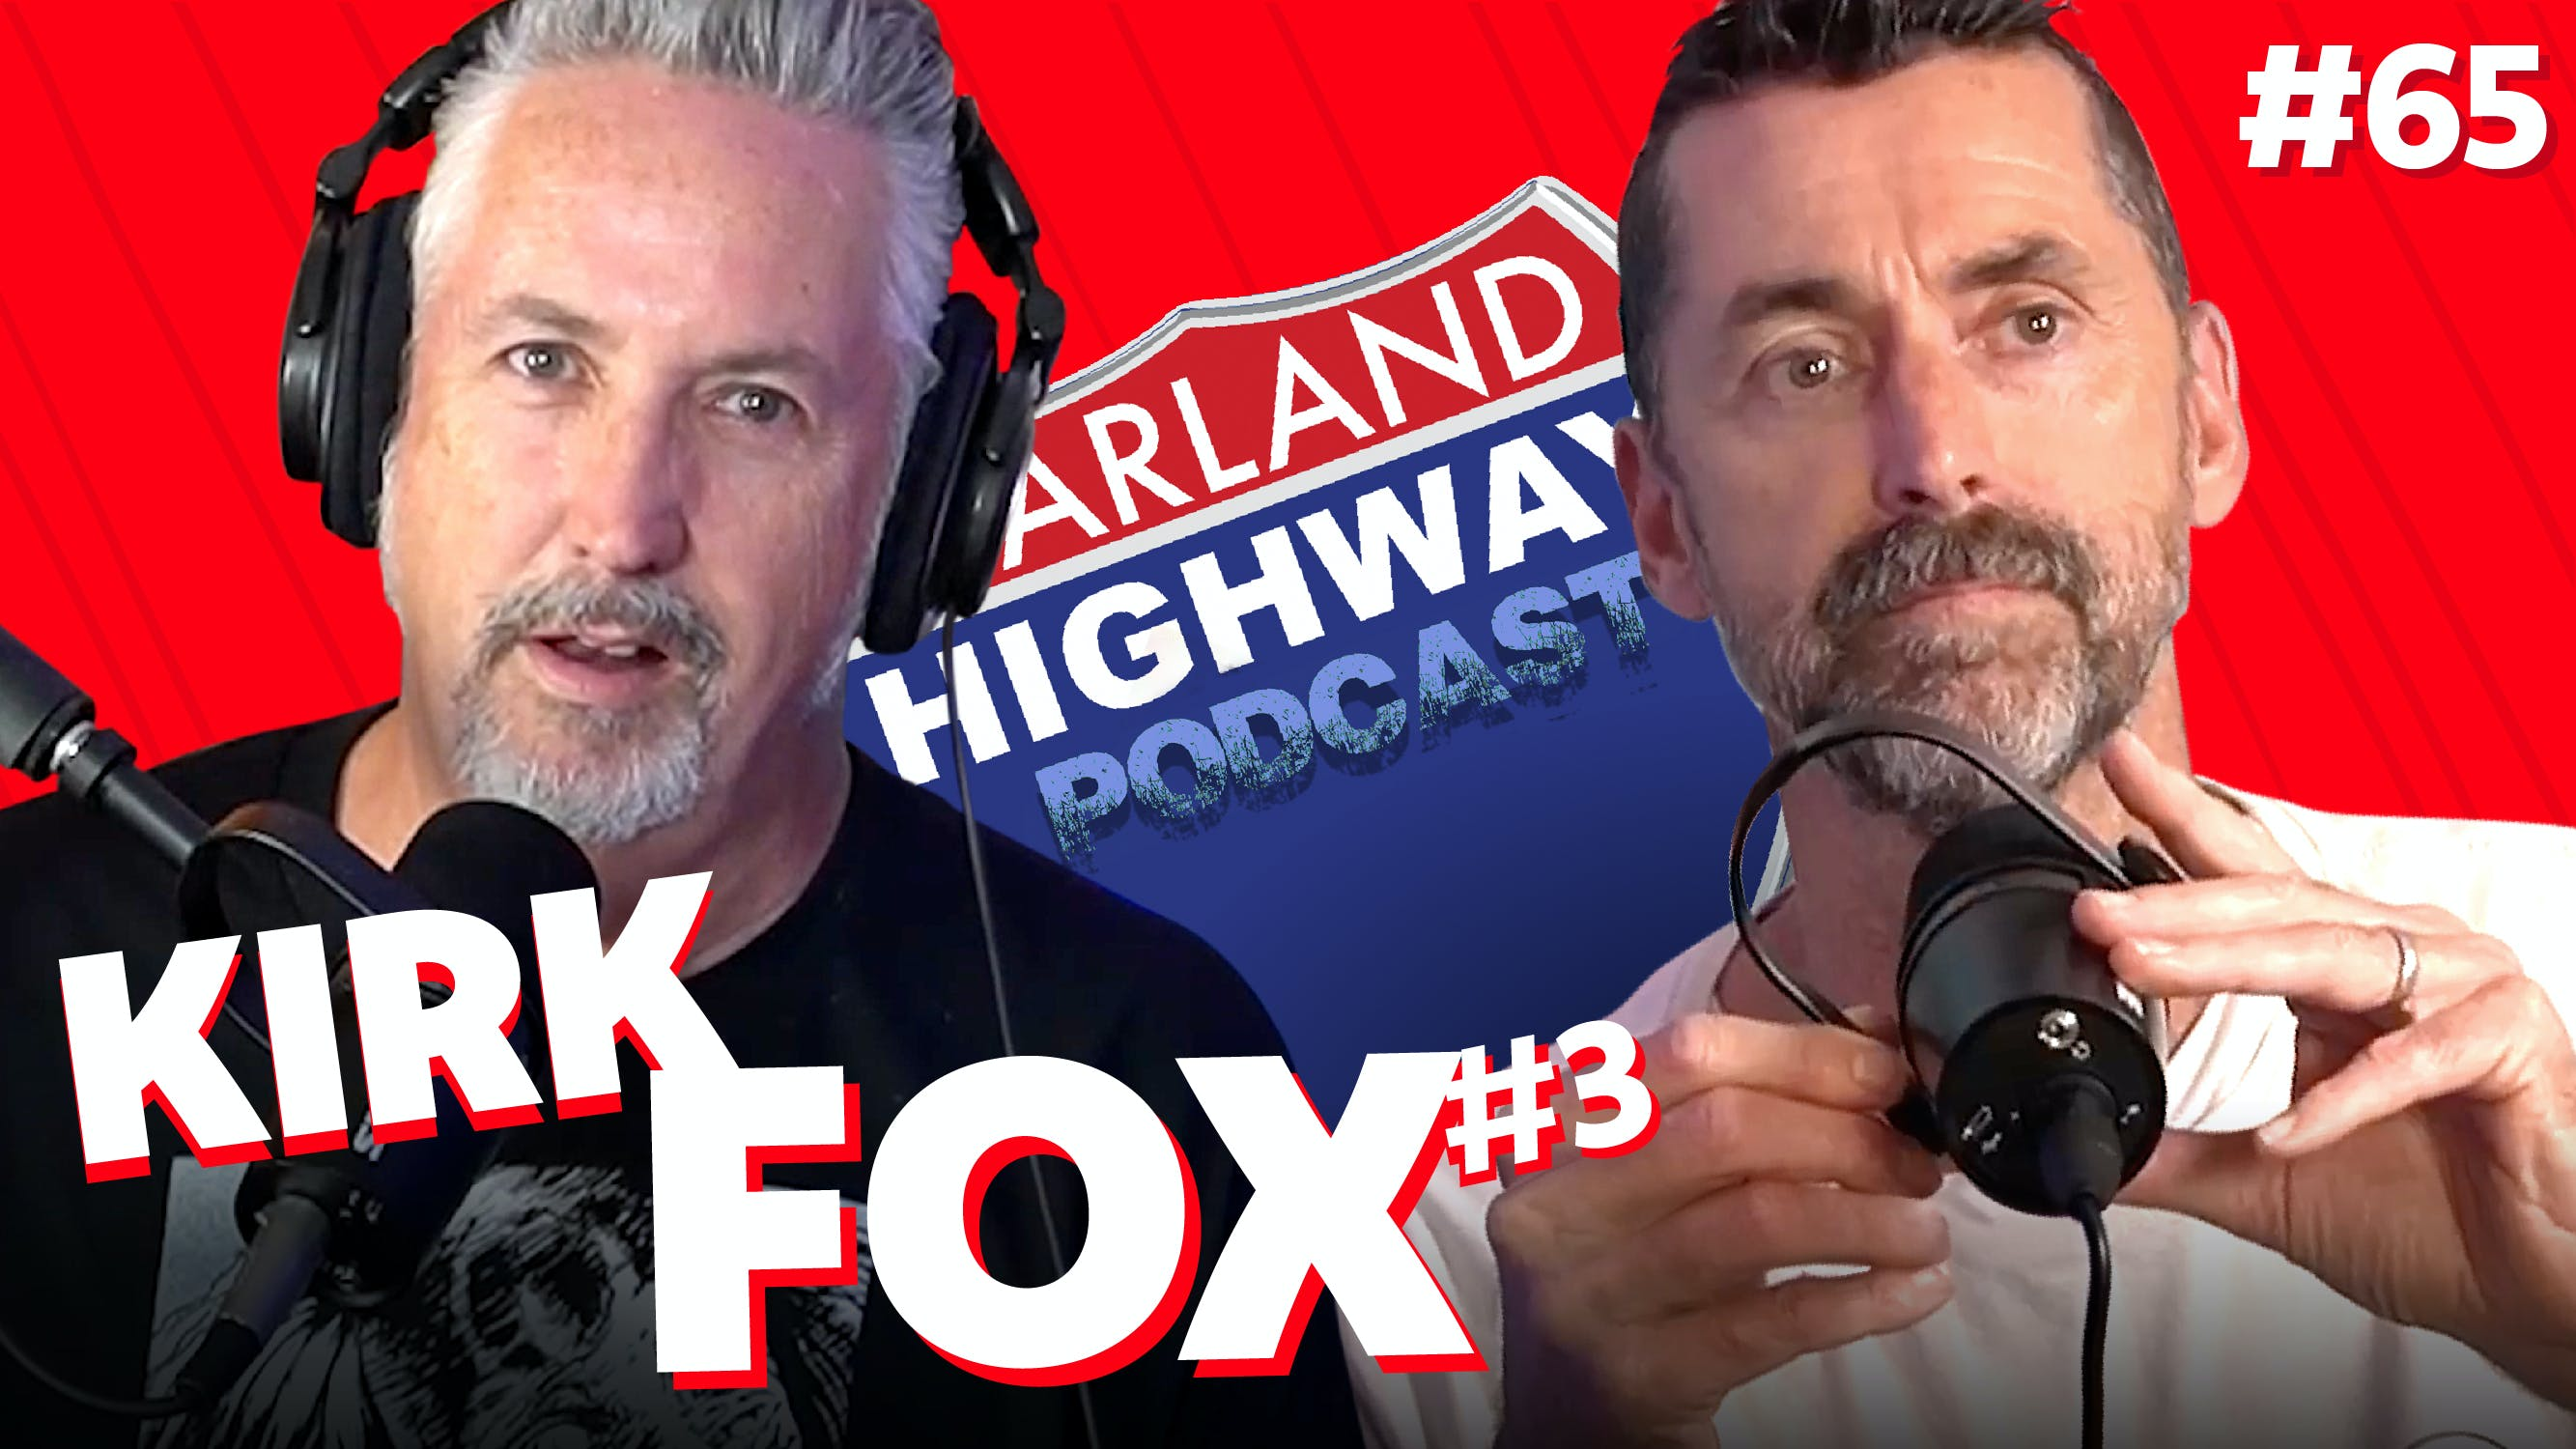 NEW HARLAND HIGHWAY #65 - KIRK FOX, Comedian, Actor, Writer. Kirk's 3rd visit is full of seafood stories, death, love, and talk of his hit TV show The JURY.